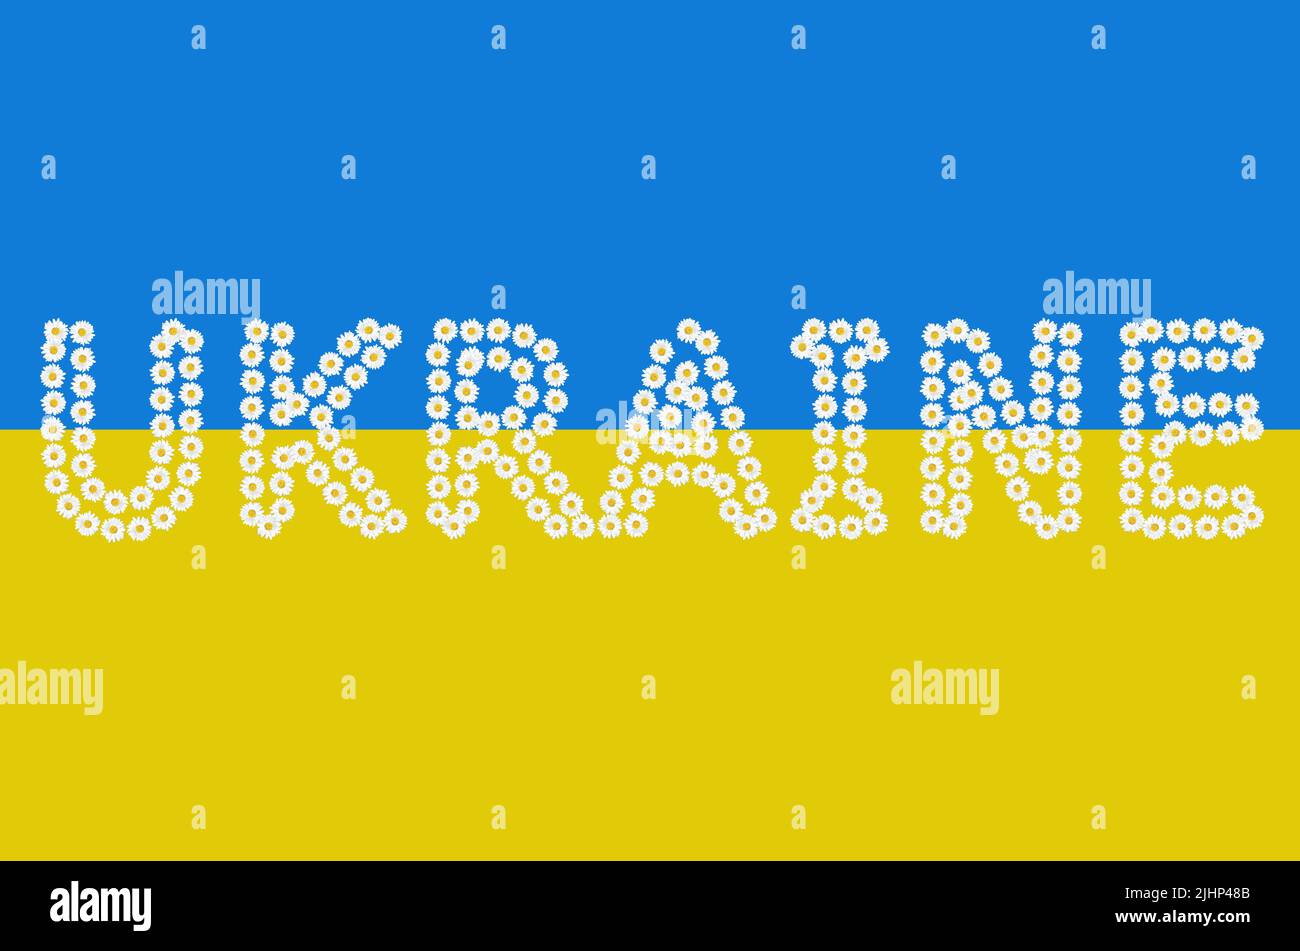 Word UKRAINE arranged from fresh daisy flowers on a yellow and blue background. Stock Photo